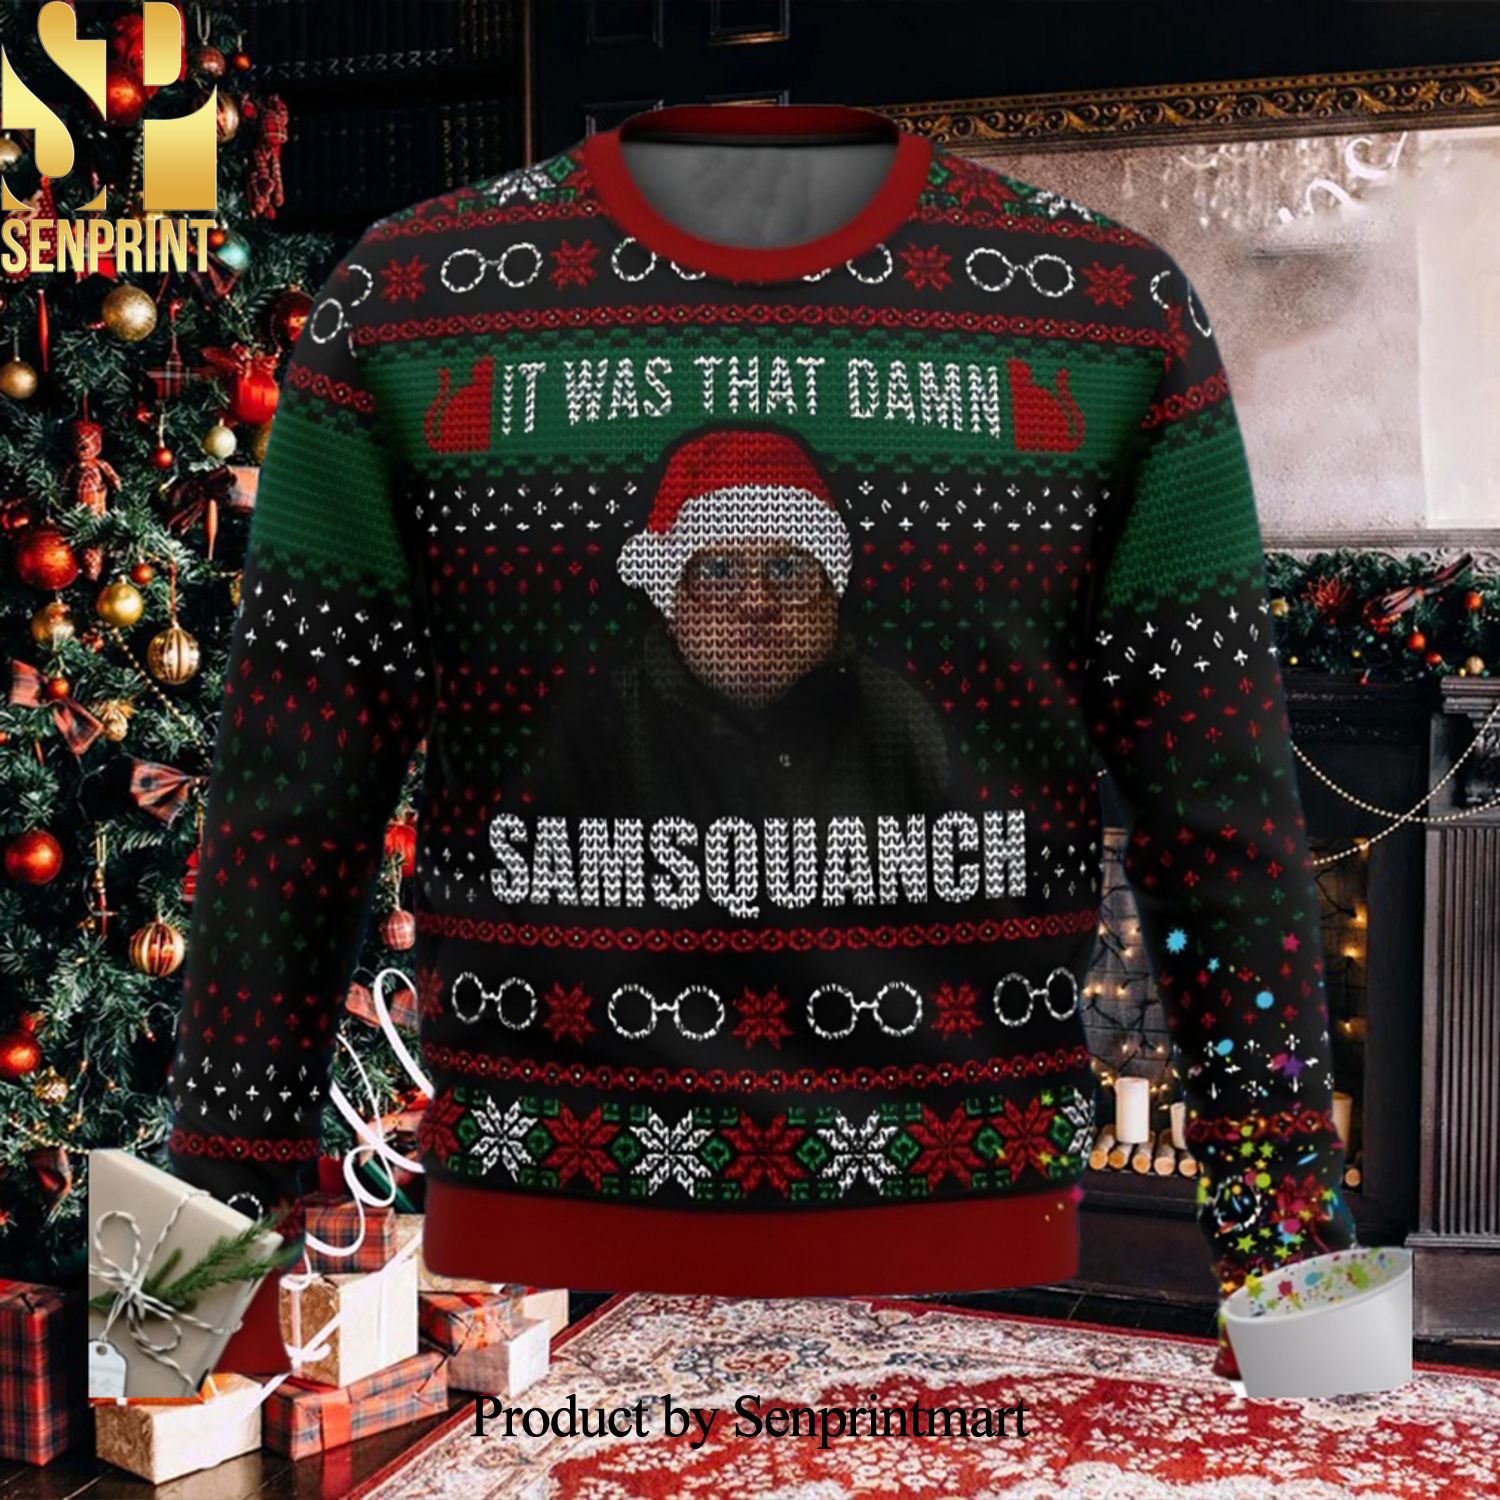 Trailer Park Boys Samsquanch It Was That Damn Ugly Christmas Wool Knitted Sweater